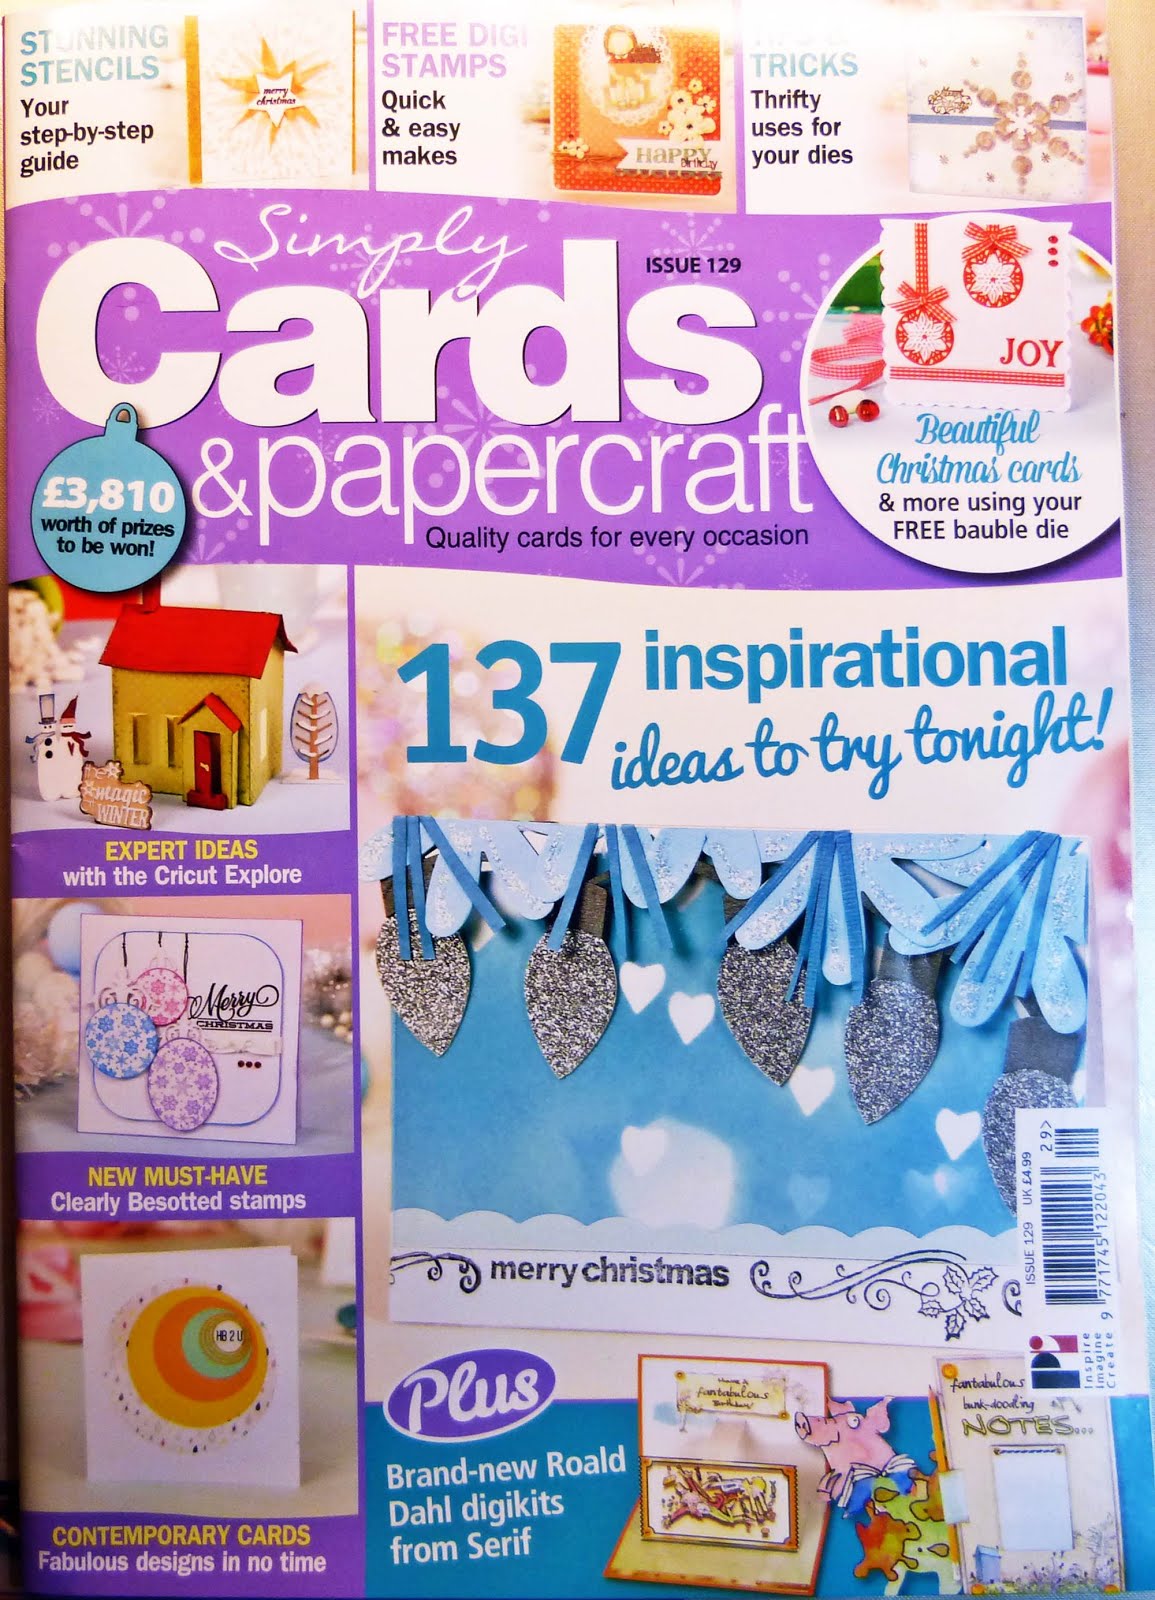 Published Simply Cards & Papercrafts Issue 129